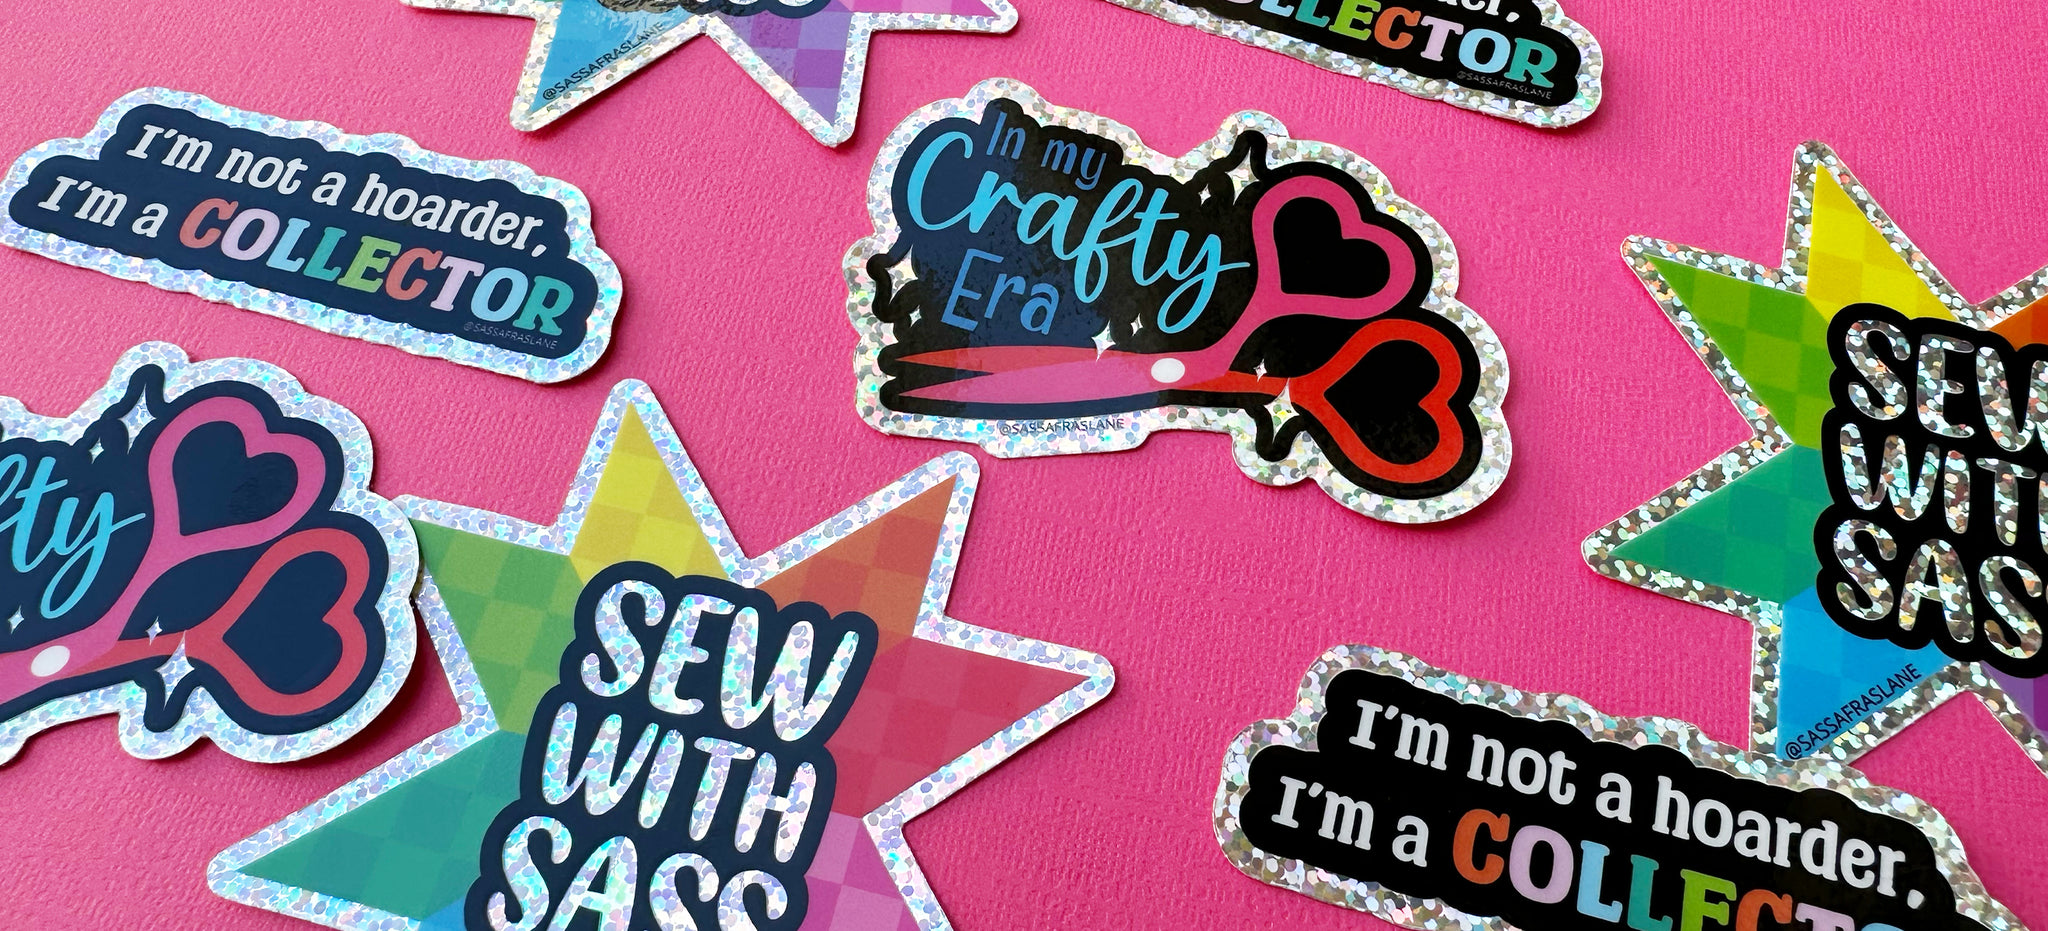 Brand New Glittery Stickers & Labor Day Weekend Sale!